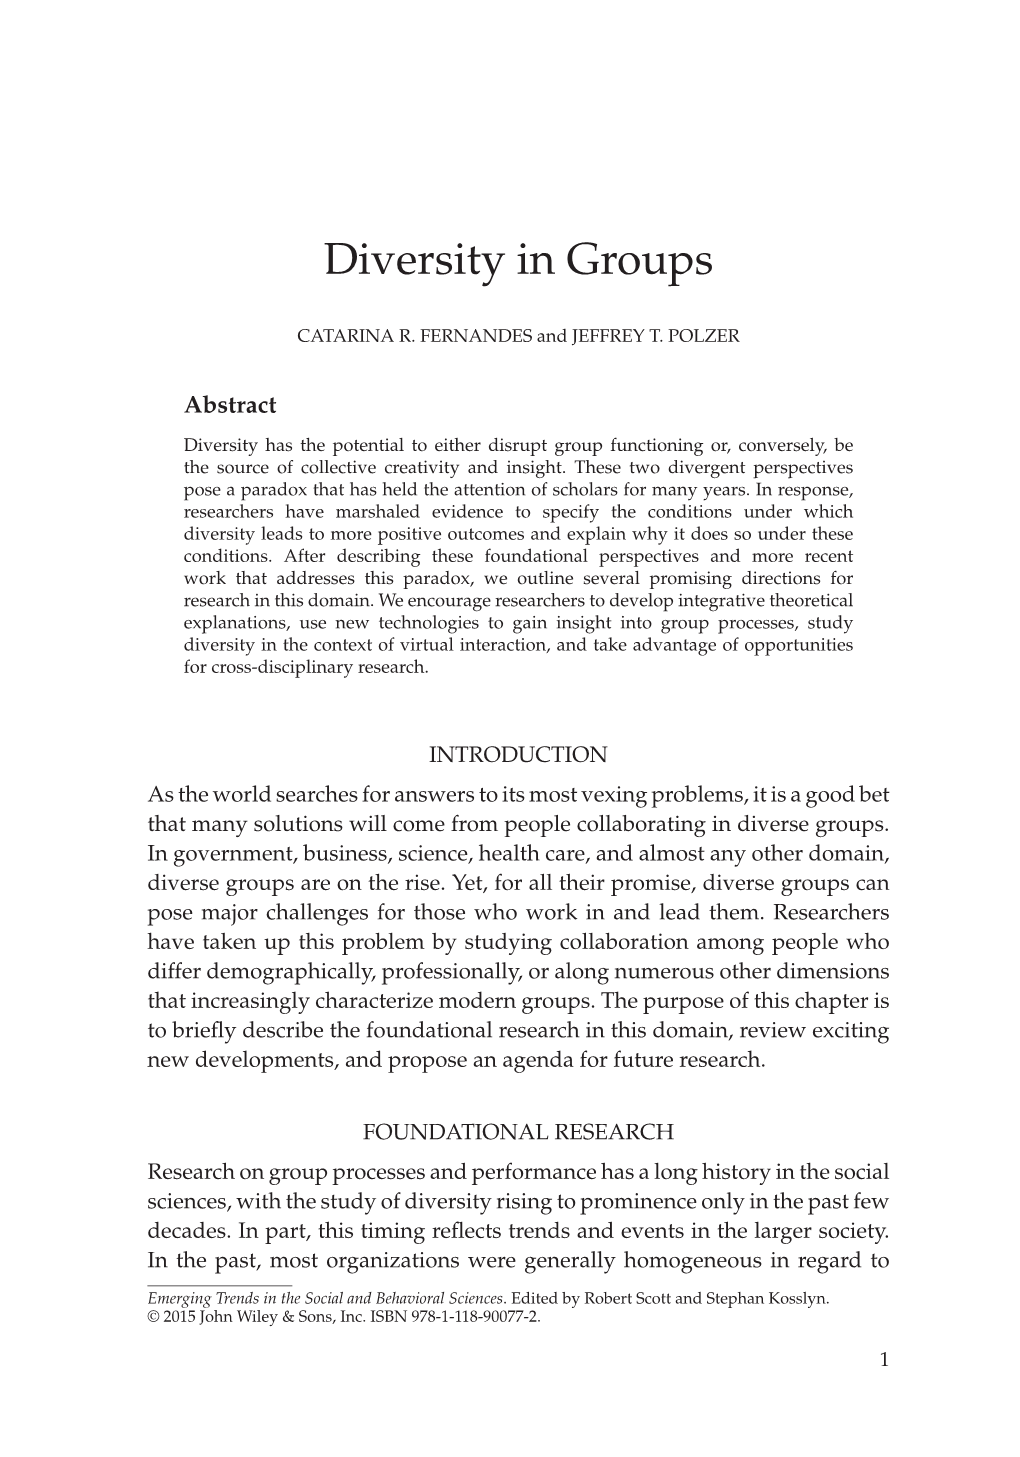 "Diversity in Groups" In: Emerging Trends in the Social and Behavioral